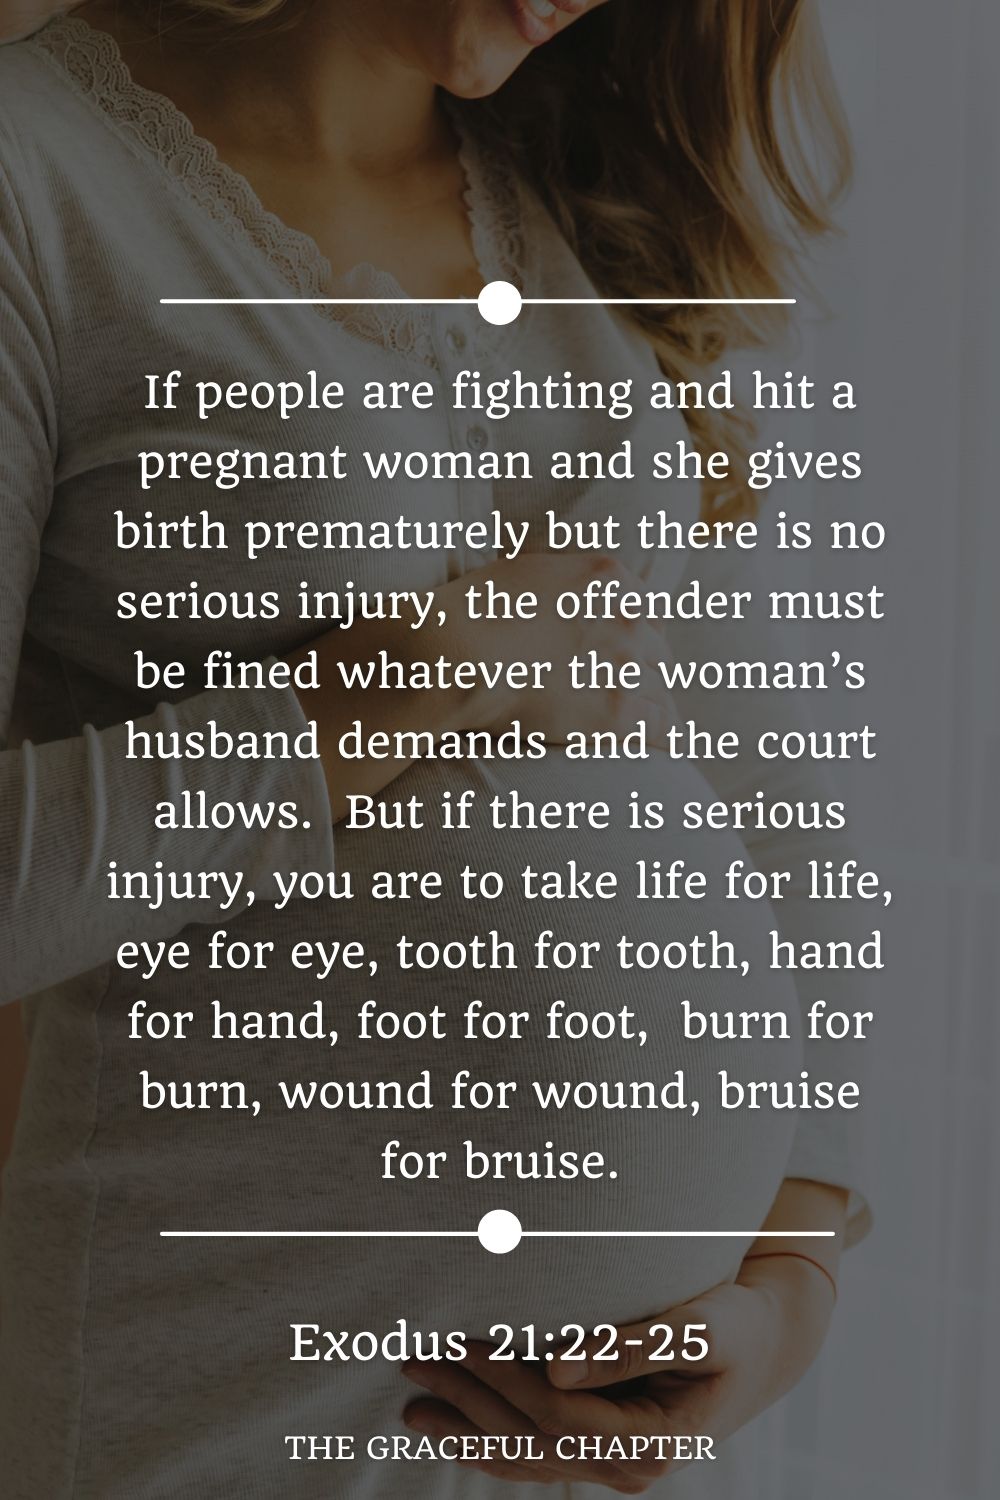 If people are fighting and hit a pregnant woman and she gives birth prematurely but there is no serious injury, the offender must be fined whatever the woman’s husband demands and the court allows.  But if there is serious injury, you are to take life for life, eye for eye, tooth for tooth, hand for hand, foot for foot,  burn for burn, wound for wound, bruise for bruise. Exodus 21:22-25